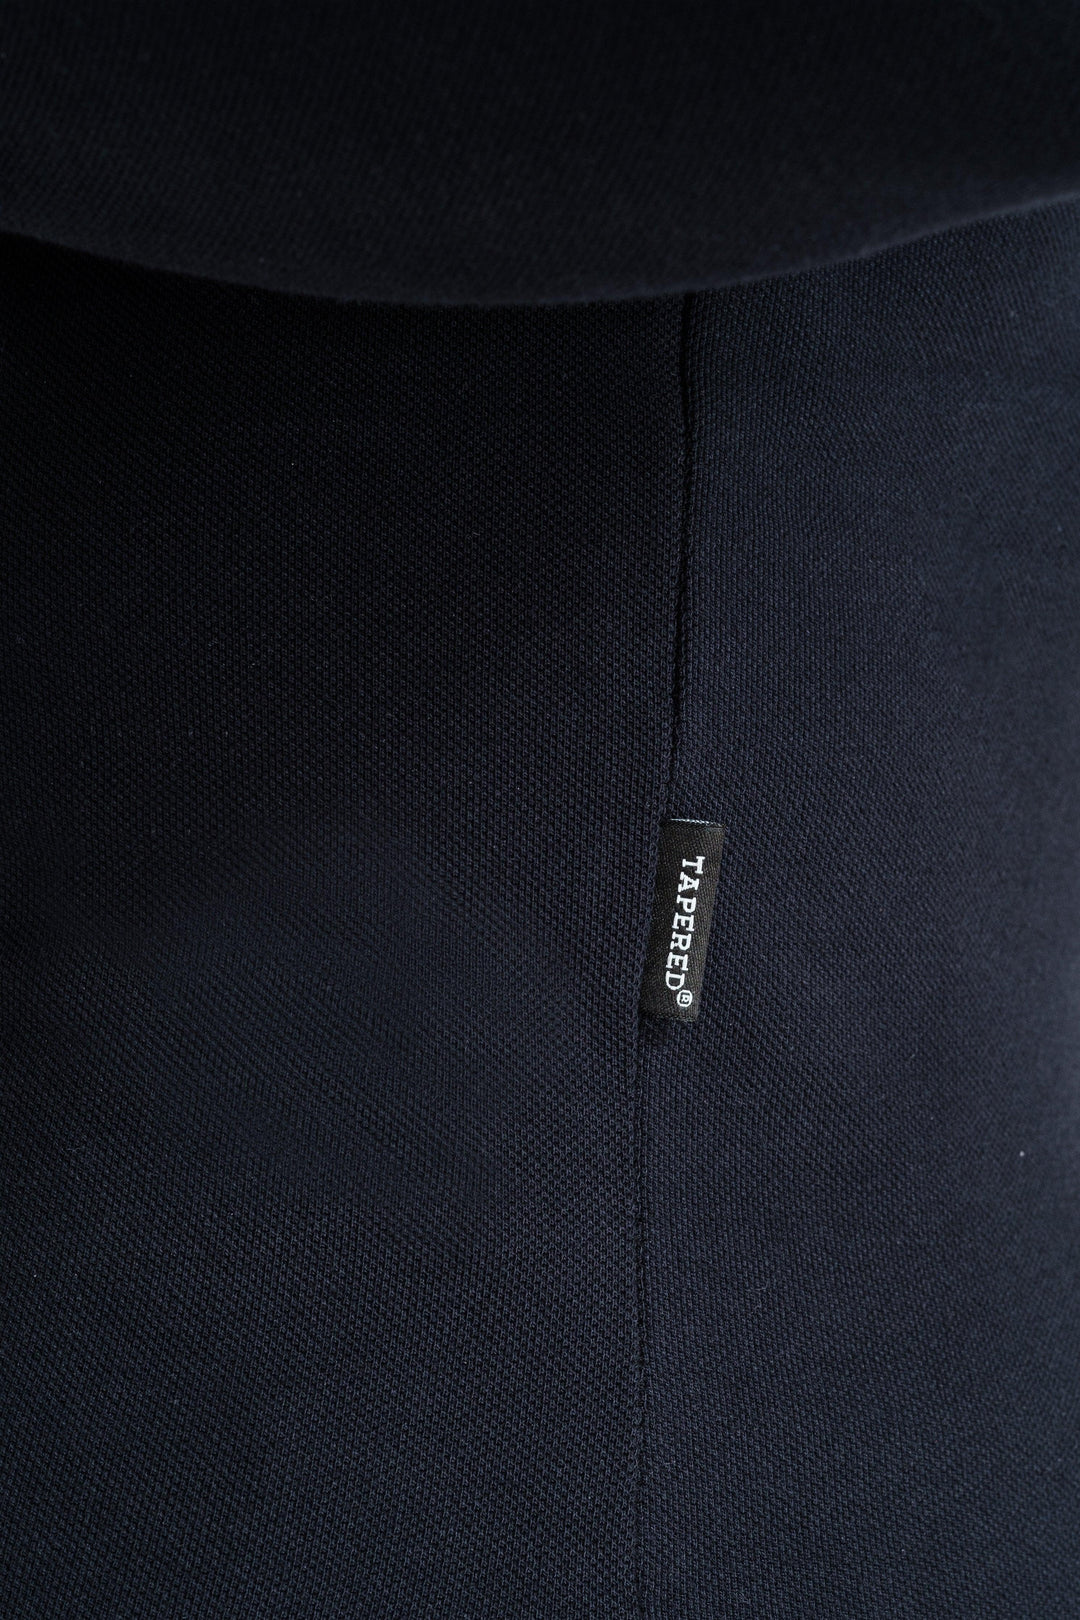 Long Sleeve Navy Tapered Fit Polo Shirt